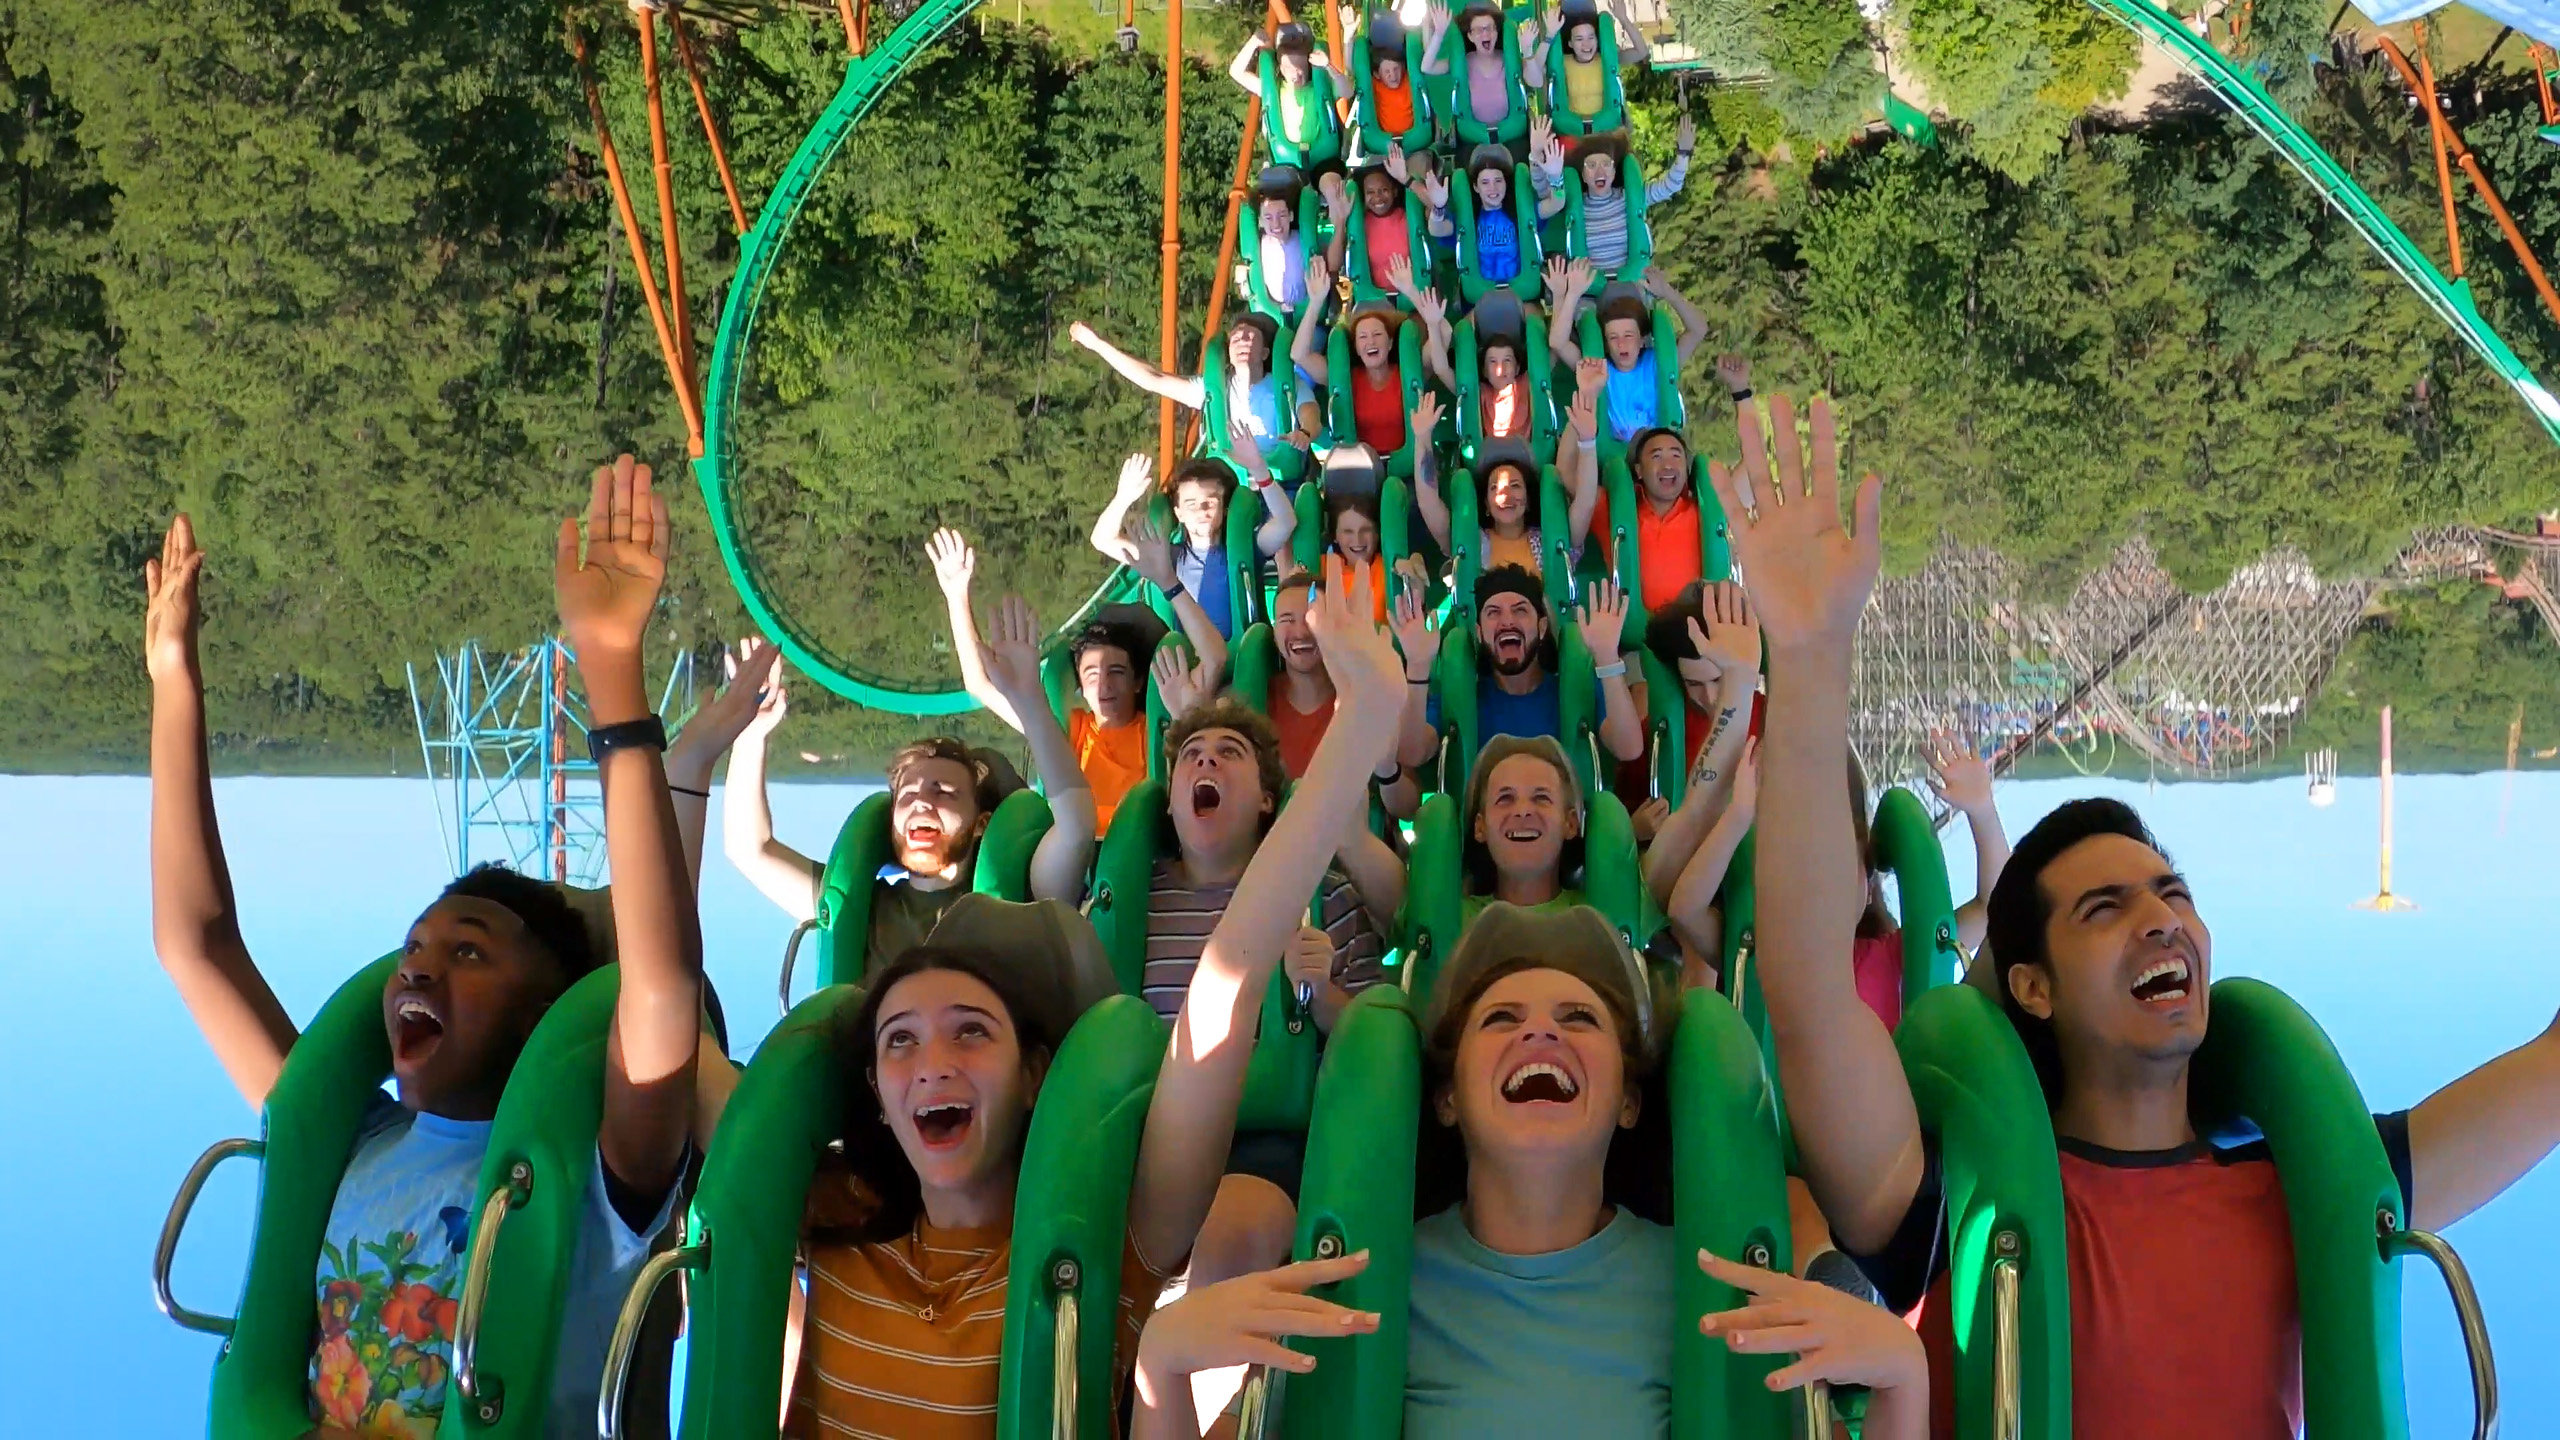 Sisters' Incredible Roller Coaster Costume Wins The Internet